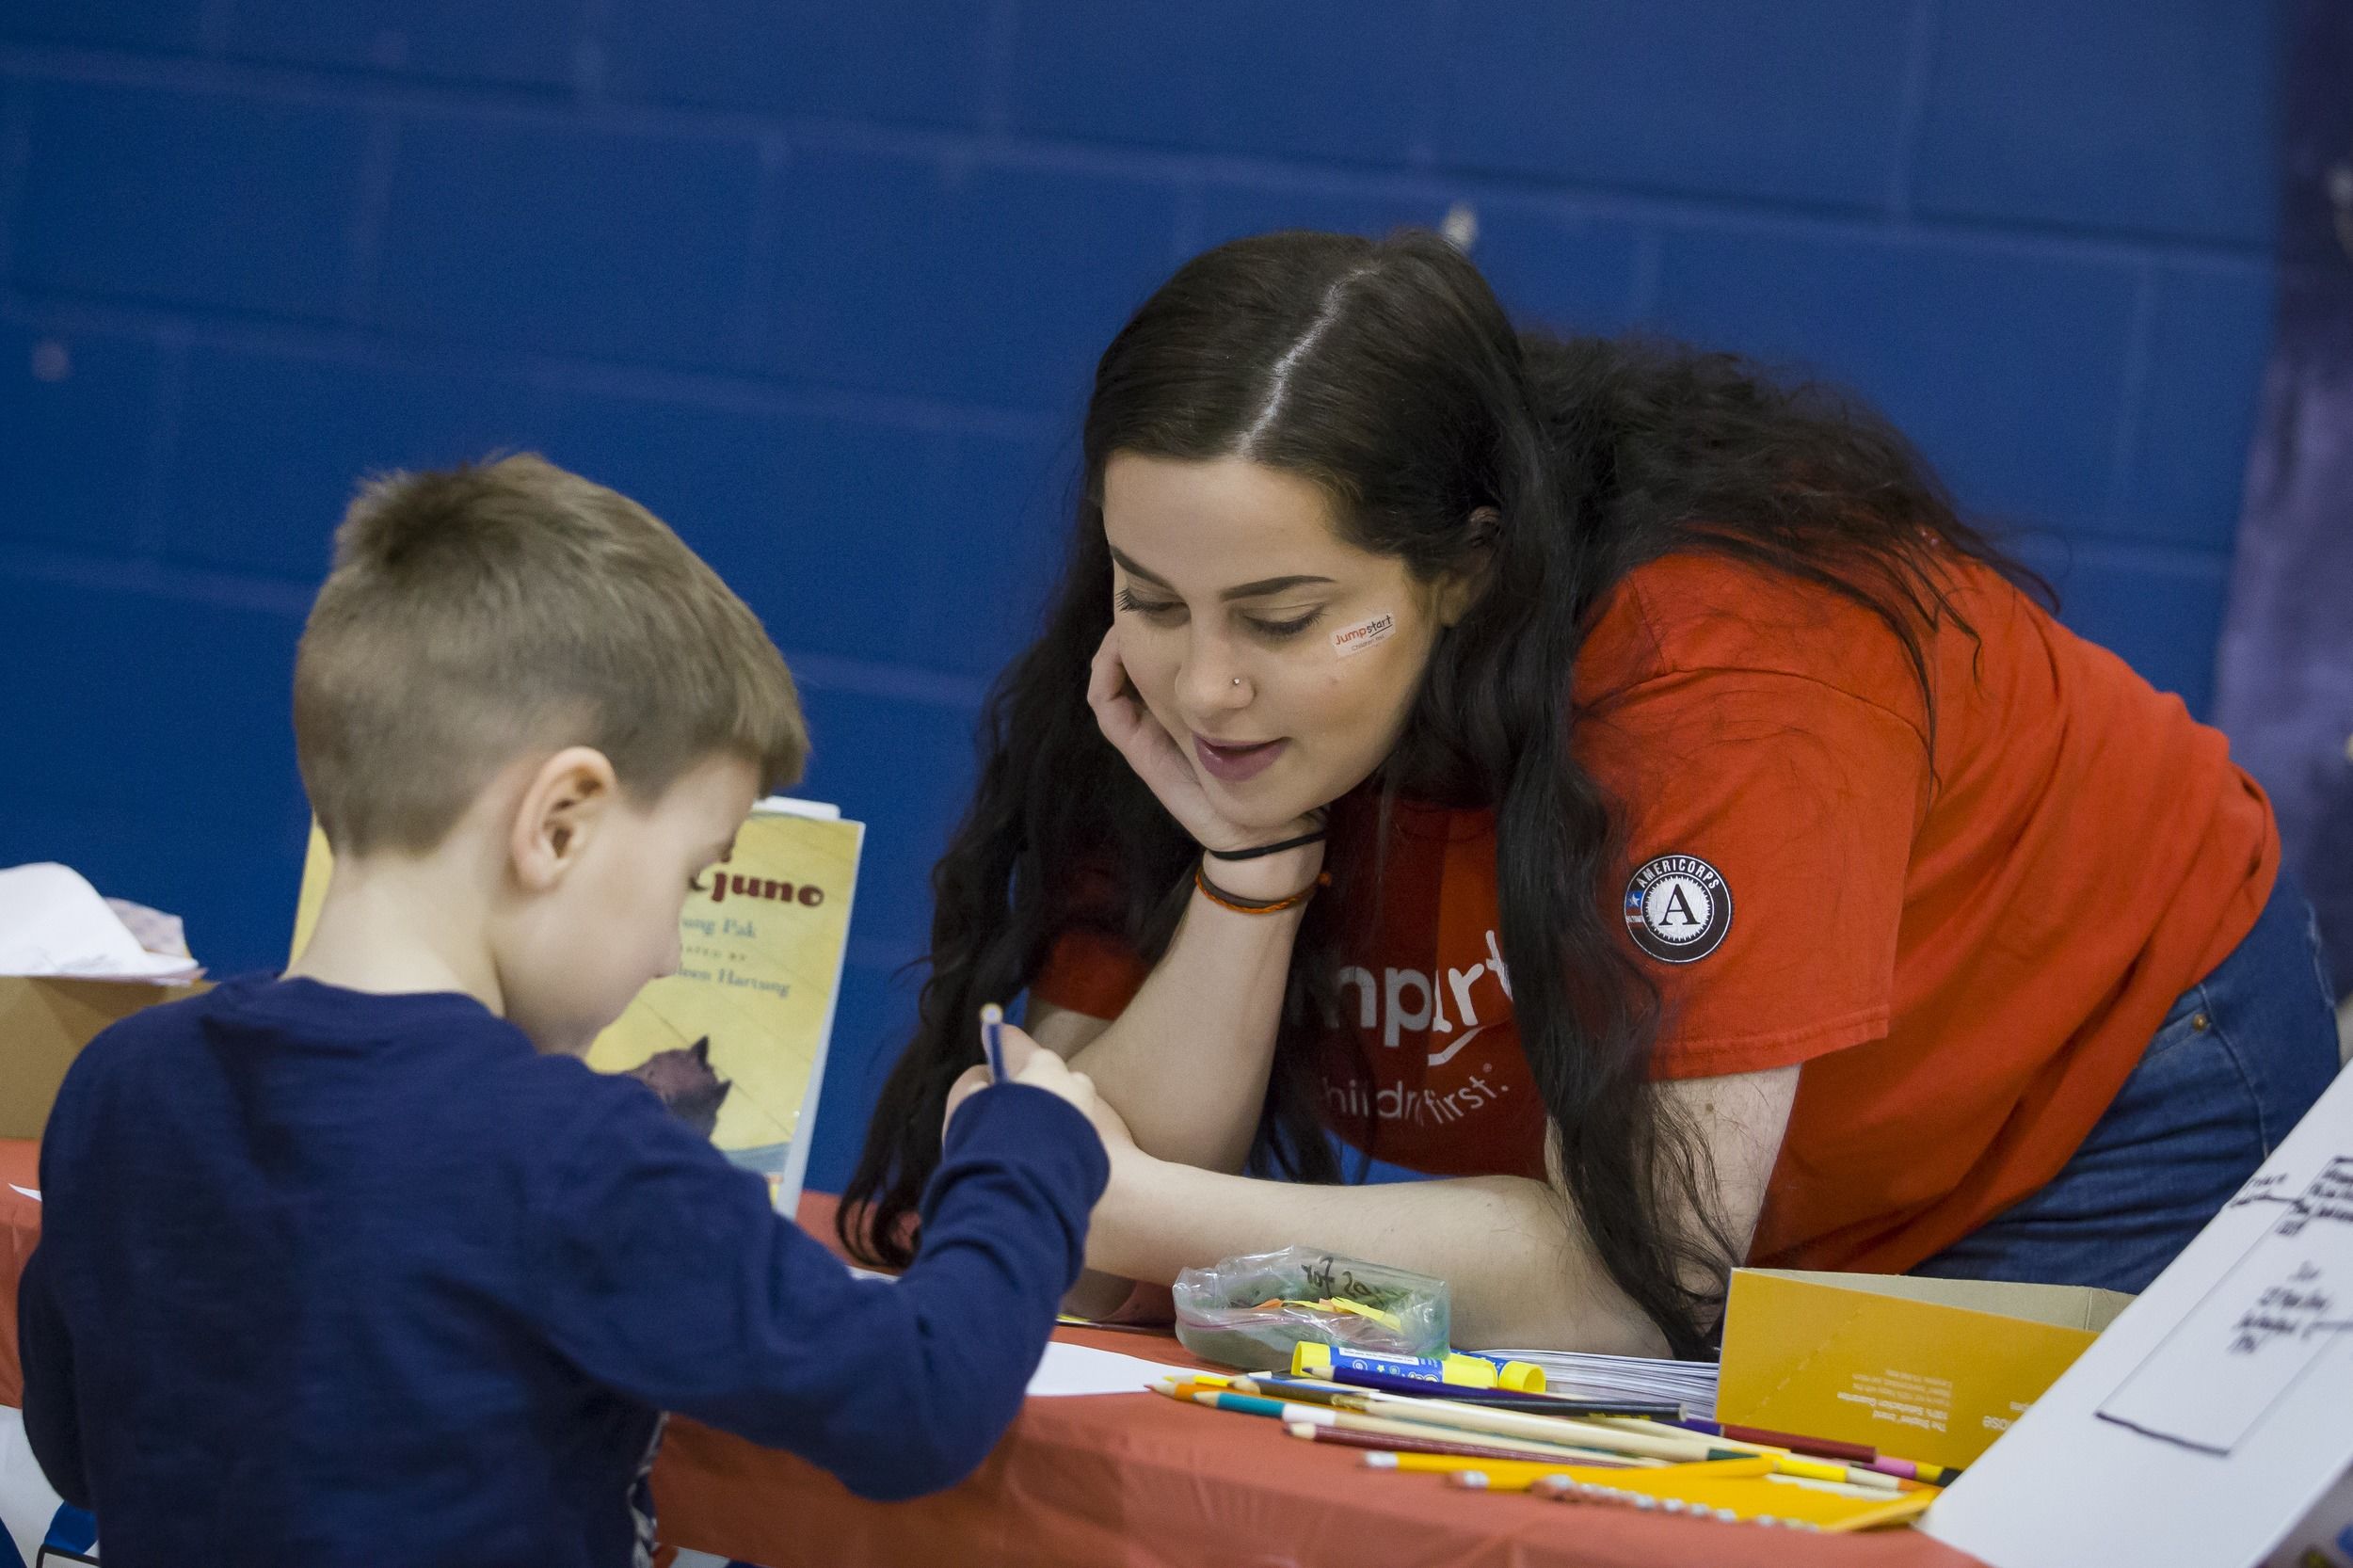 A student leans over a table to speak with a young child at an event.